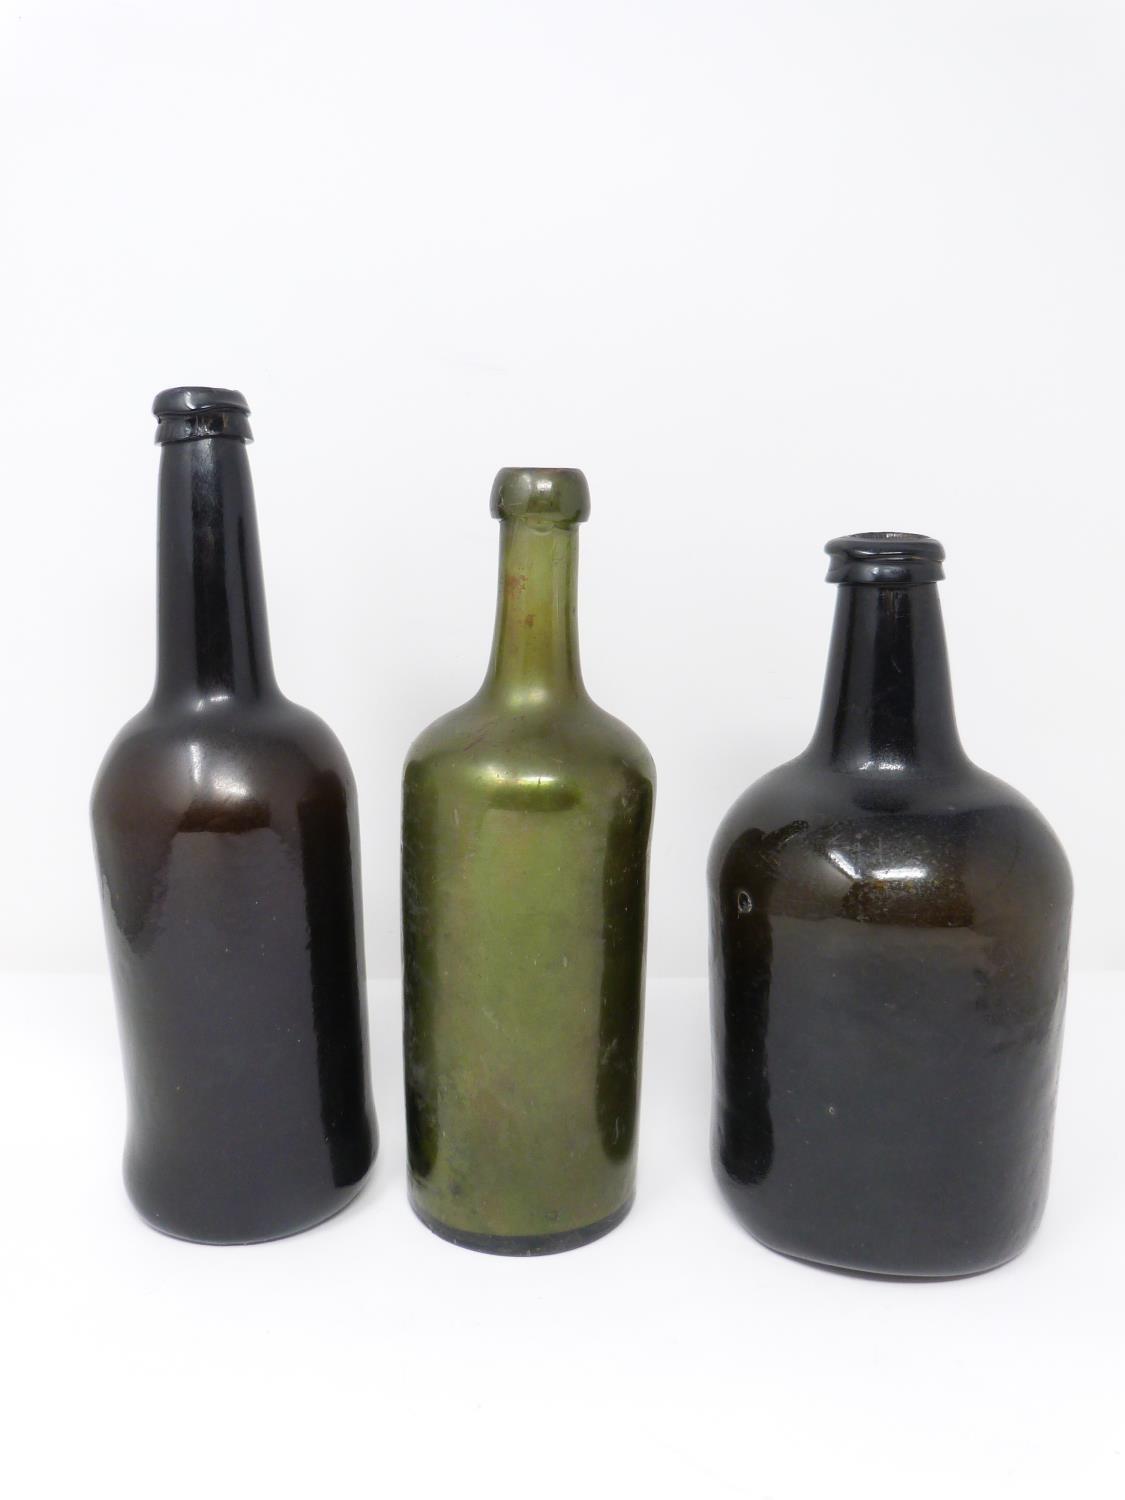 Three 18th century glass wine bottles. Two brown mallet shaped bottles and one green cylindrical